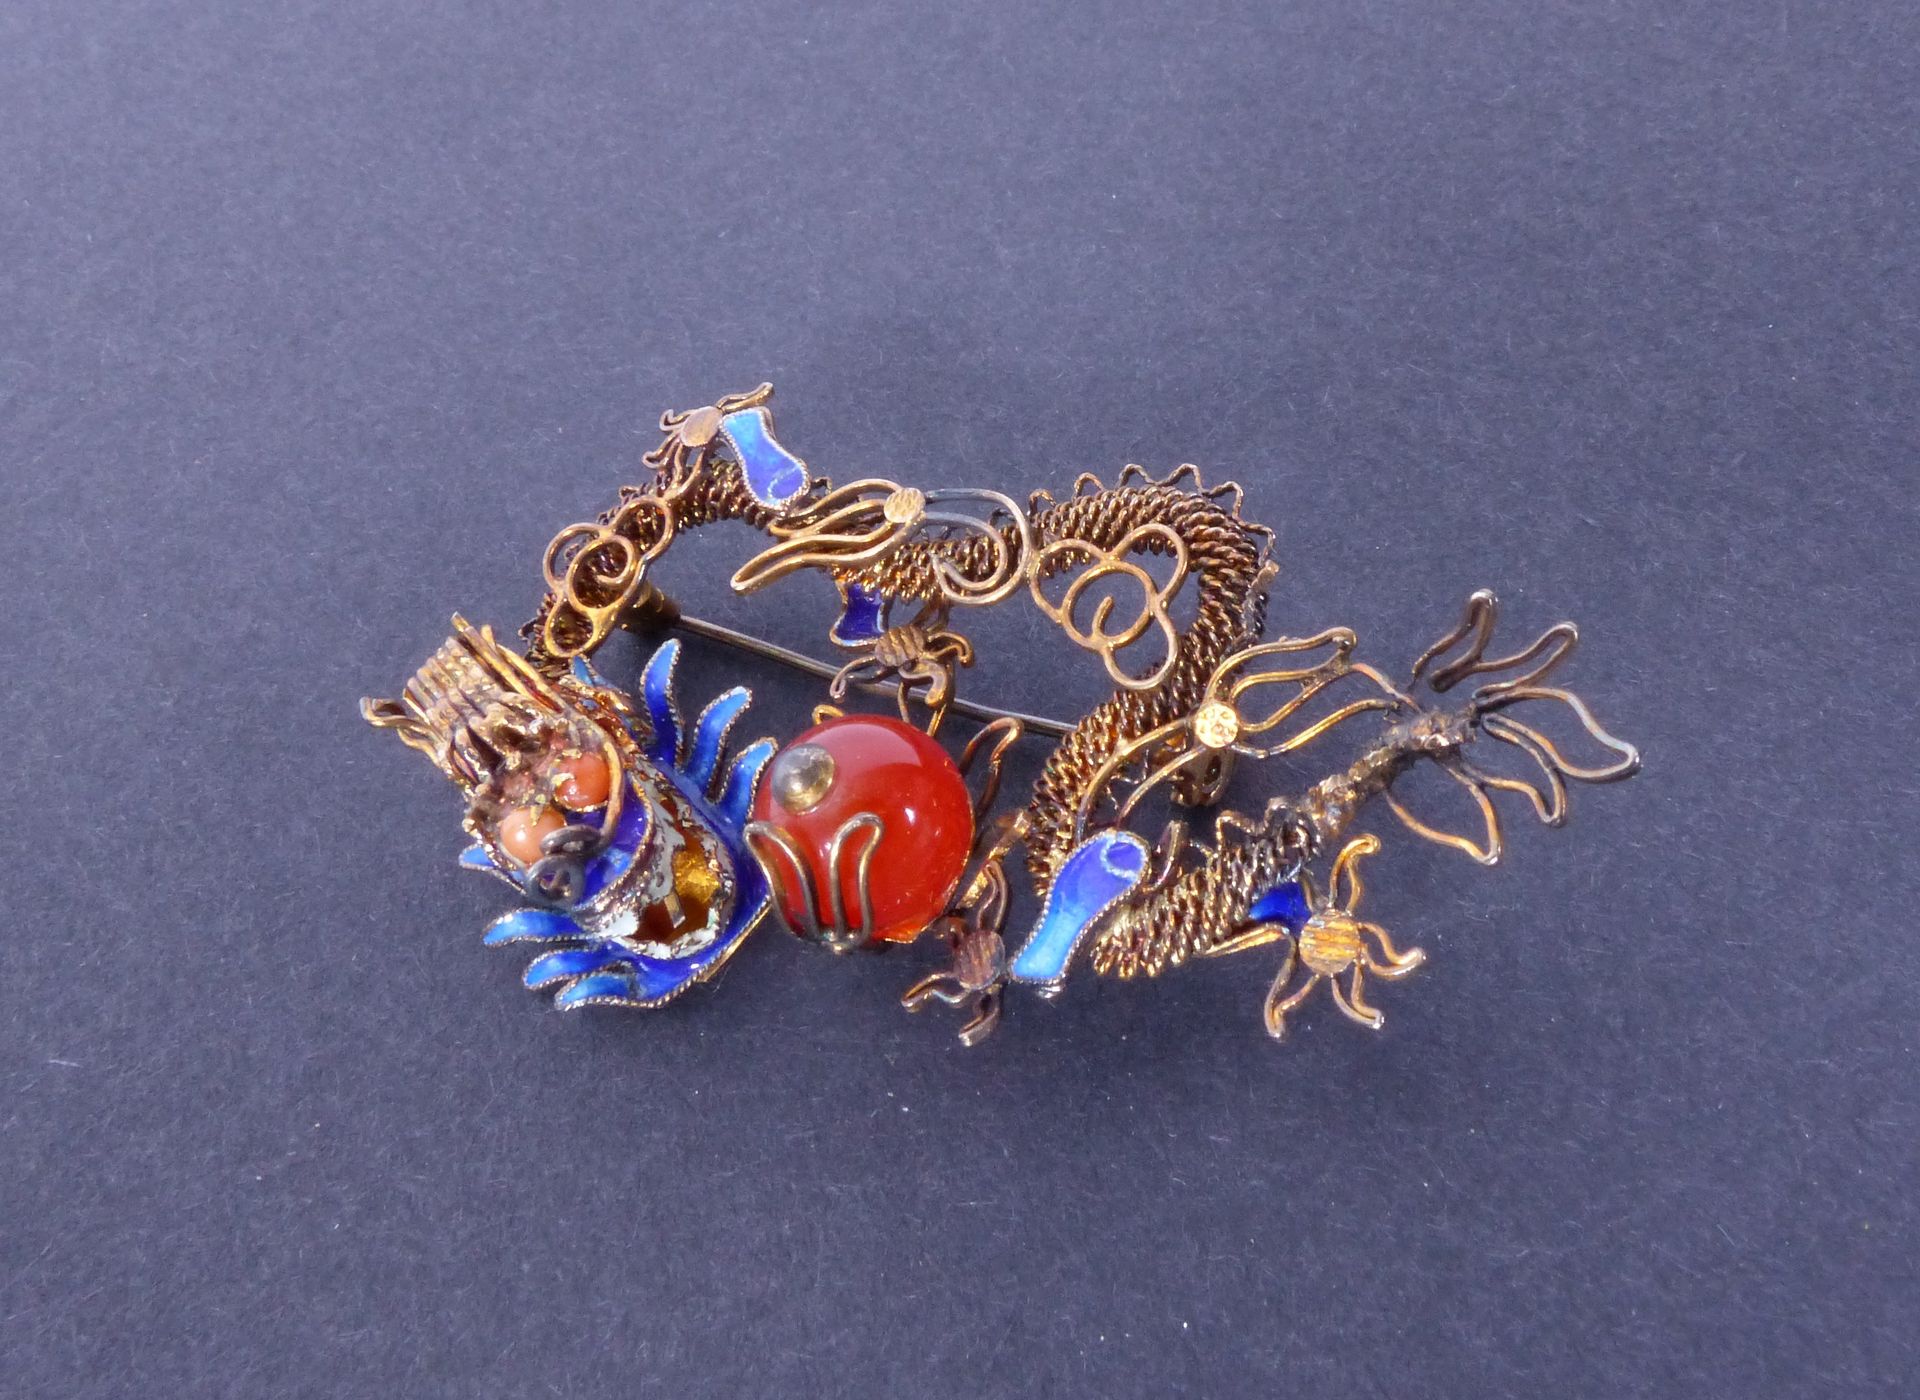 Null Brooch in the form of "Dragon" in silver vermeil and enamel. Chinese work.